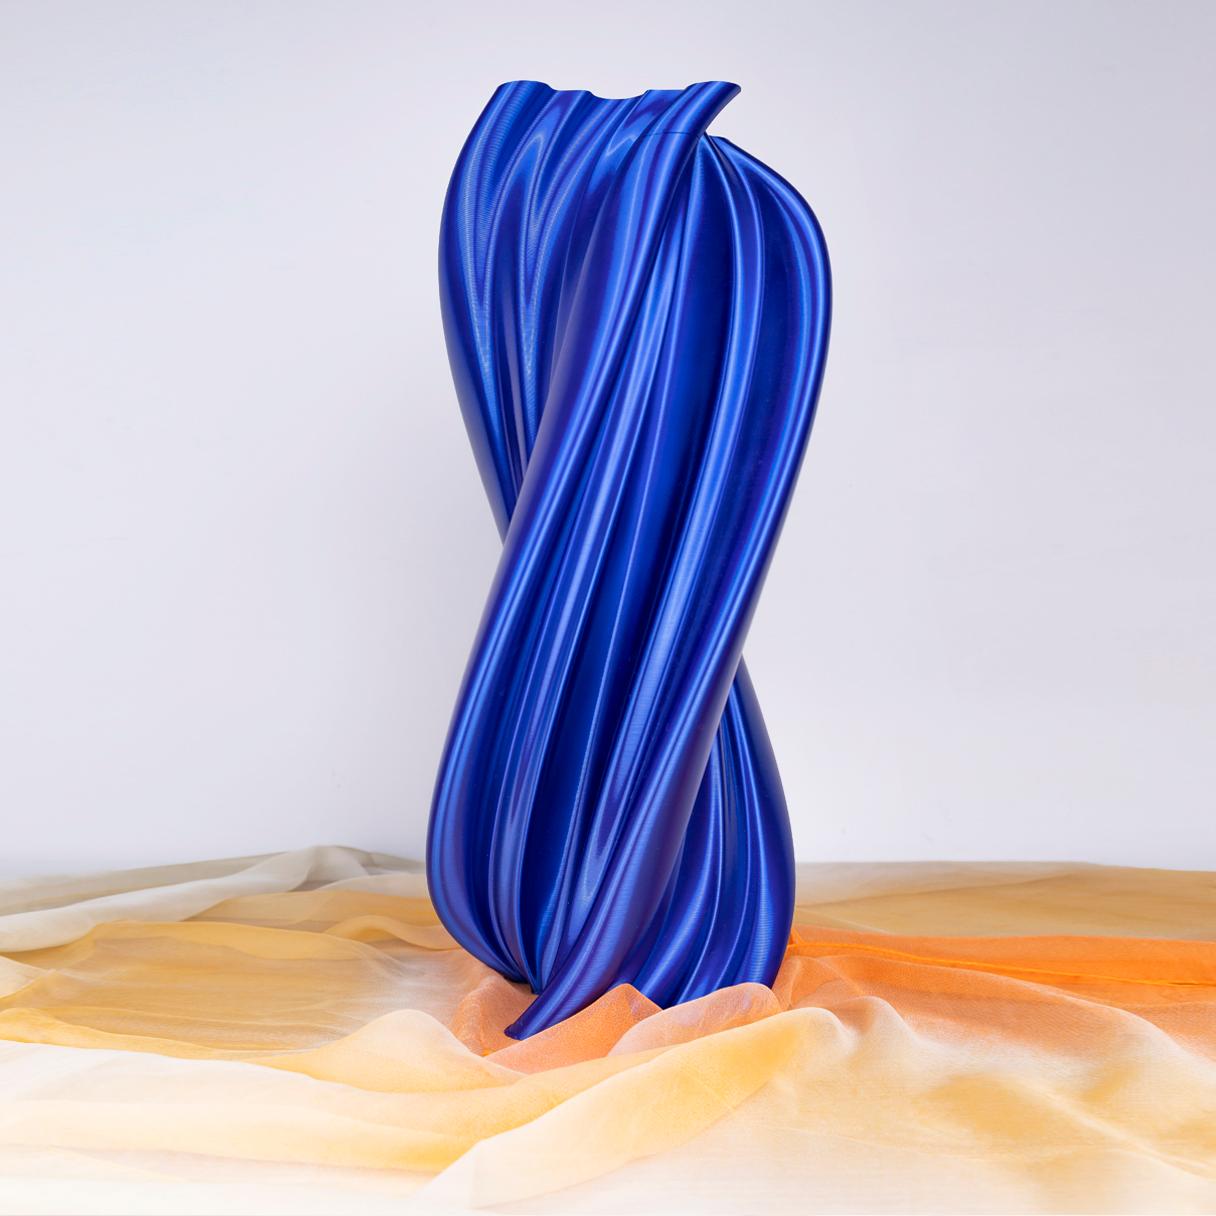 Plastic Damocle, Blue Contemporary Sustainable Vase-Sculpture For Sale